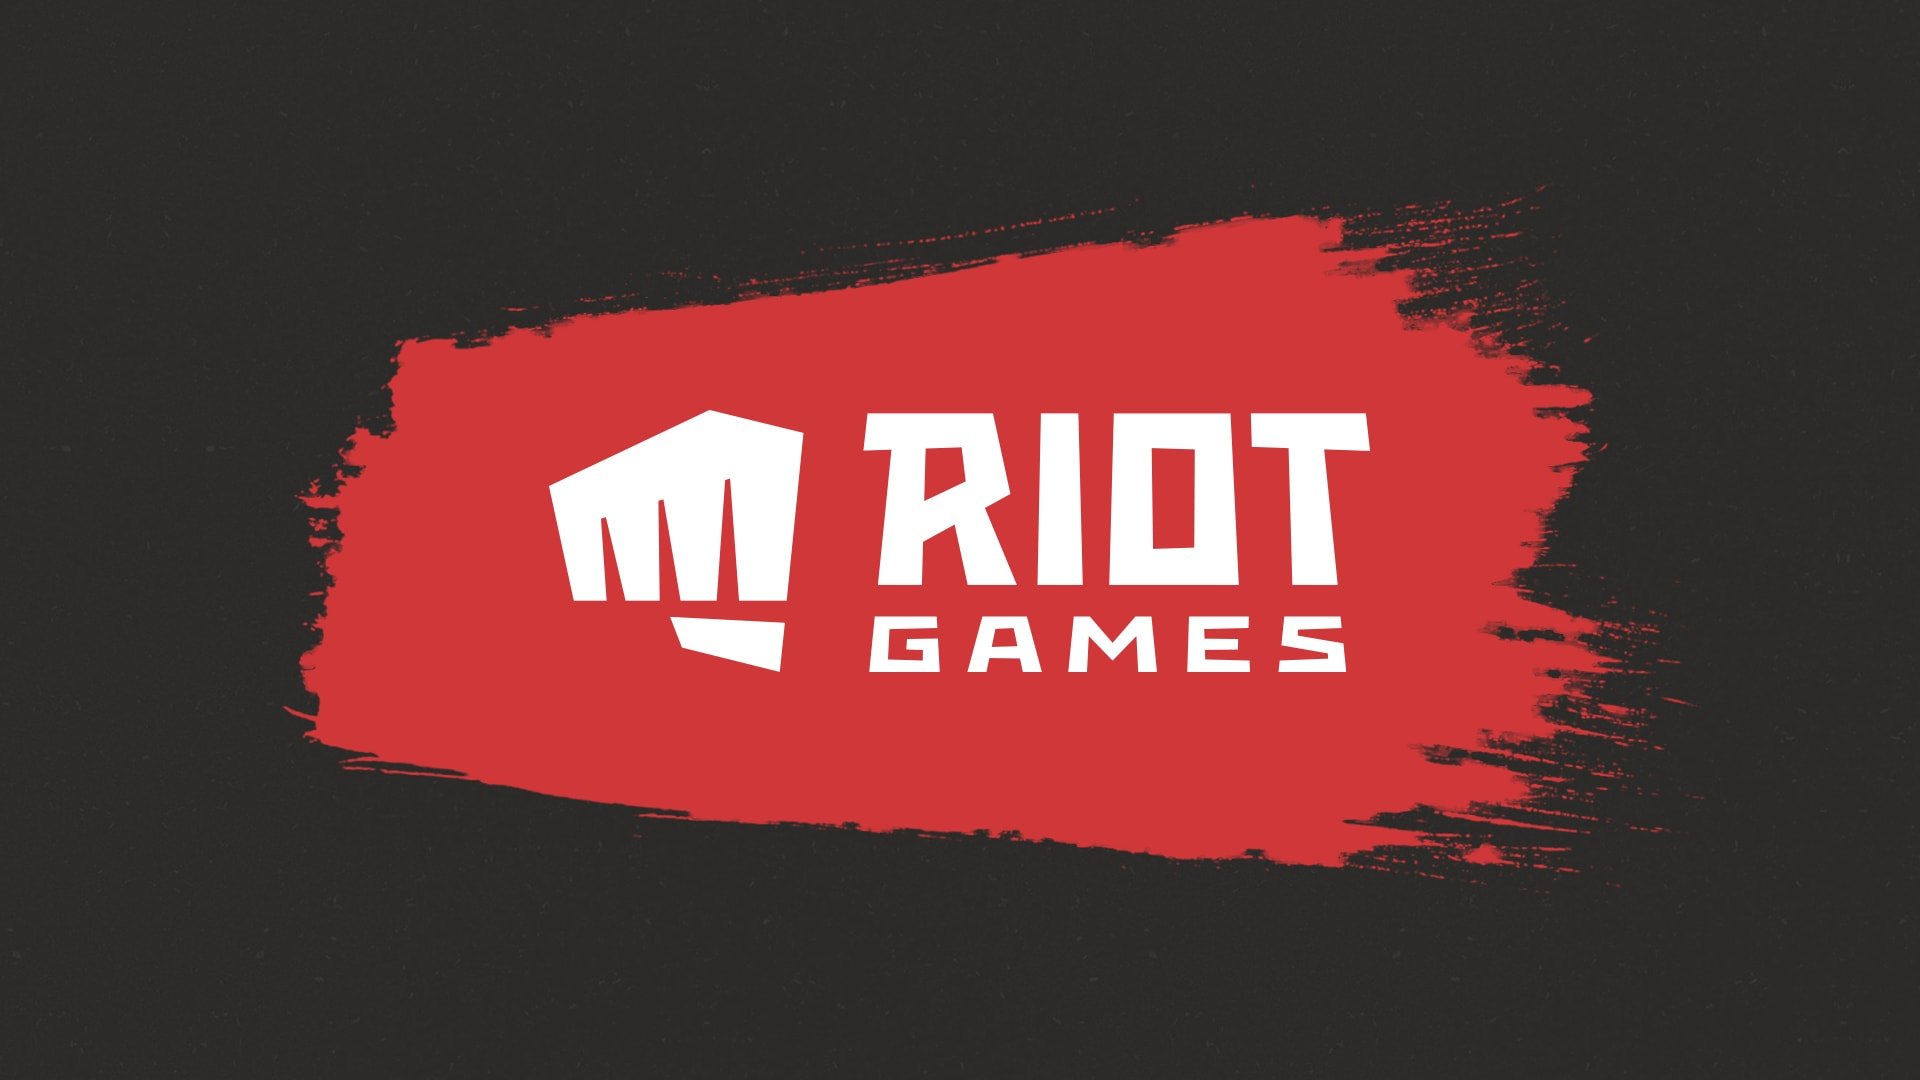 Riot Games News. Interview, Salaries, and More